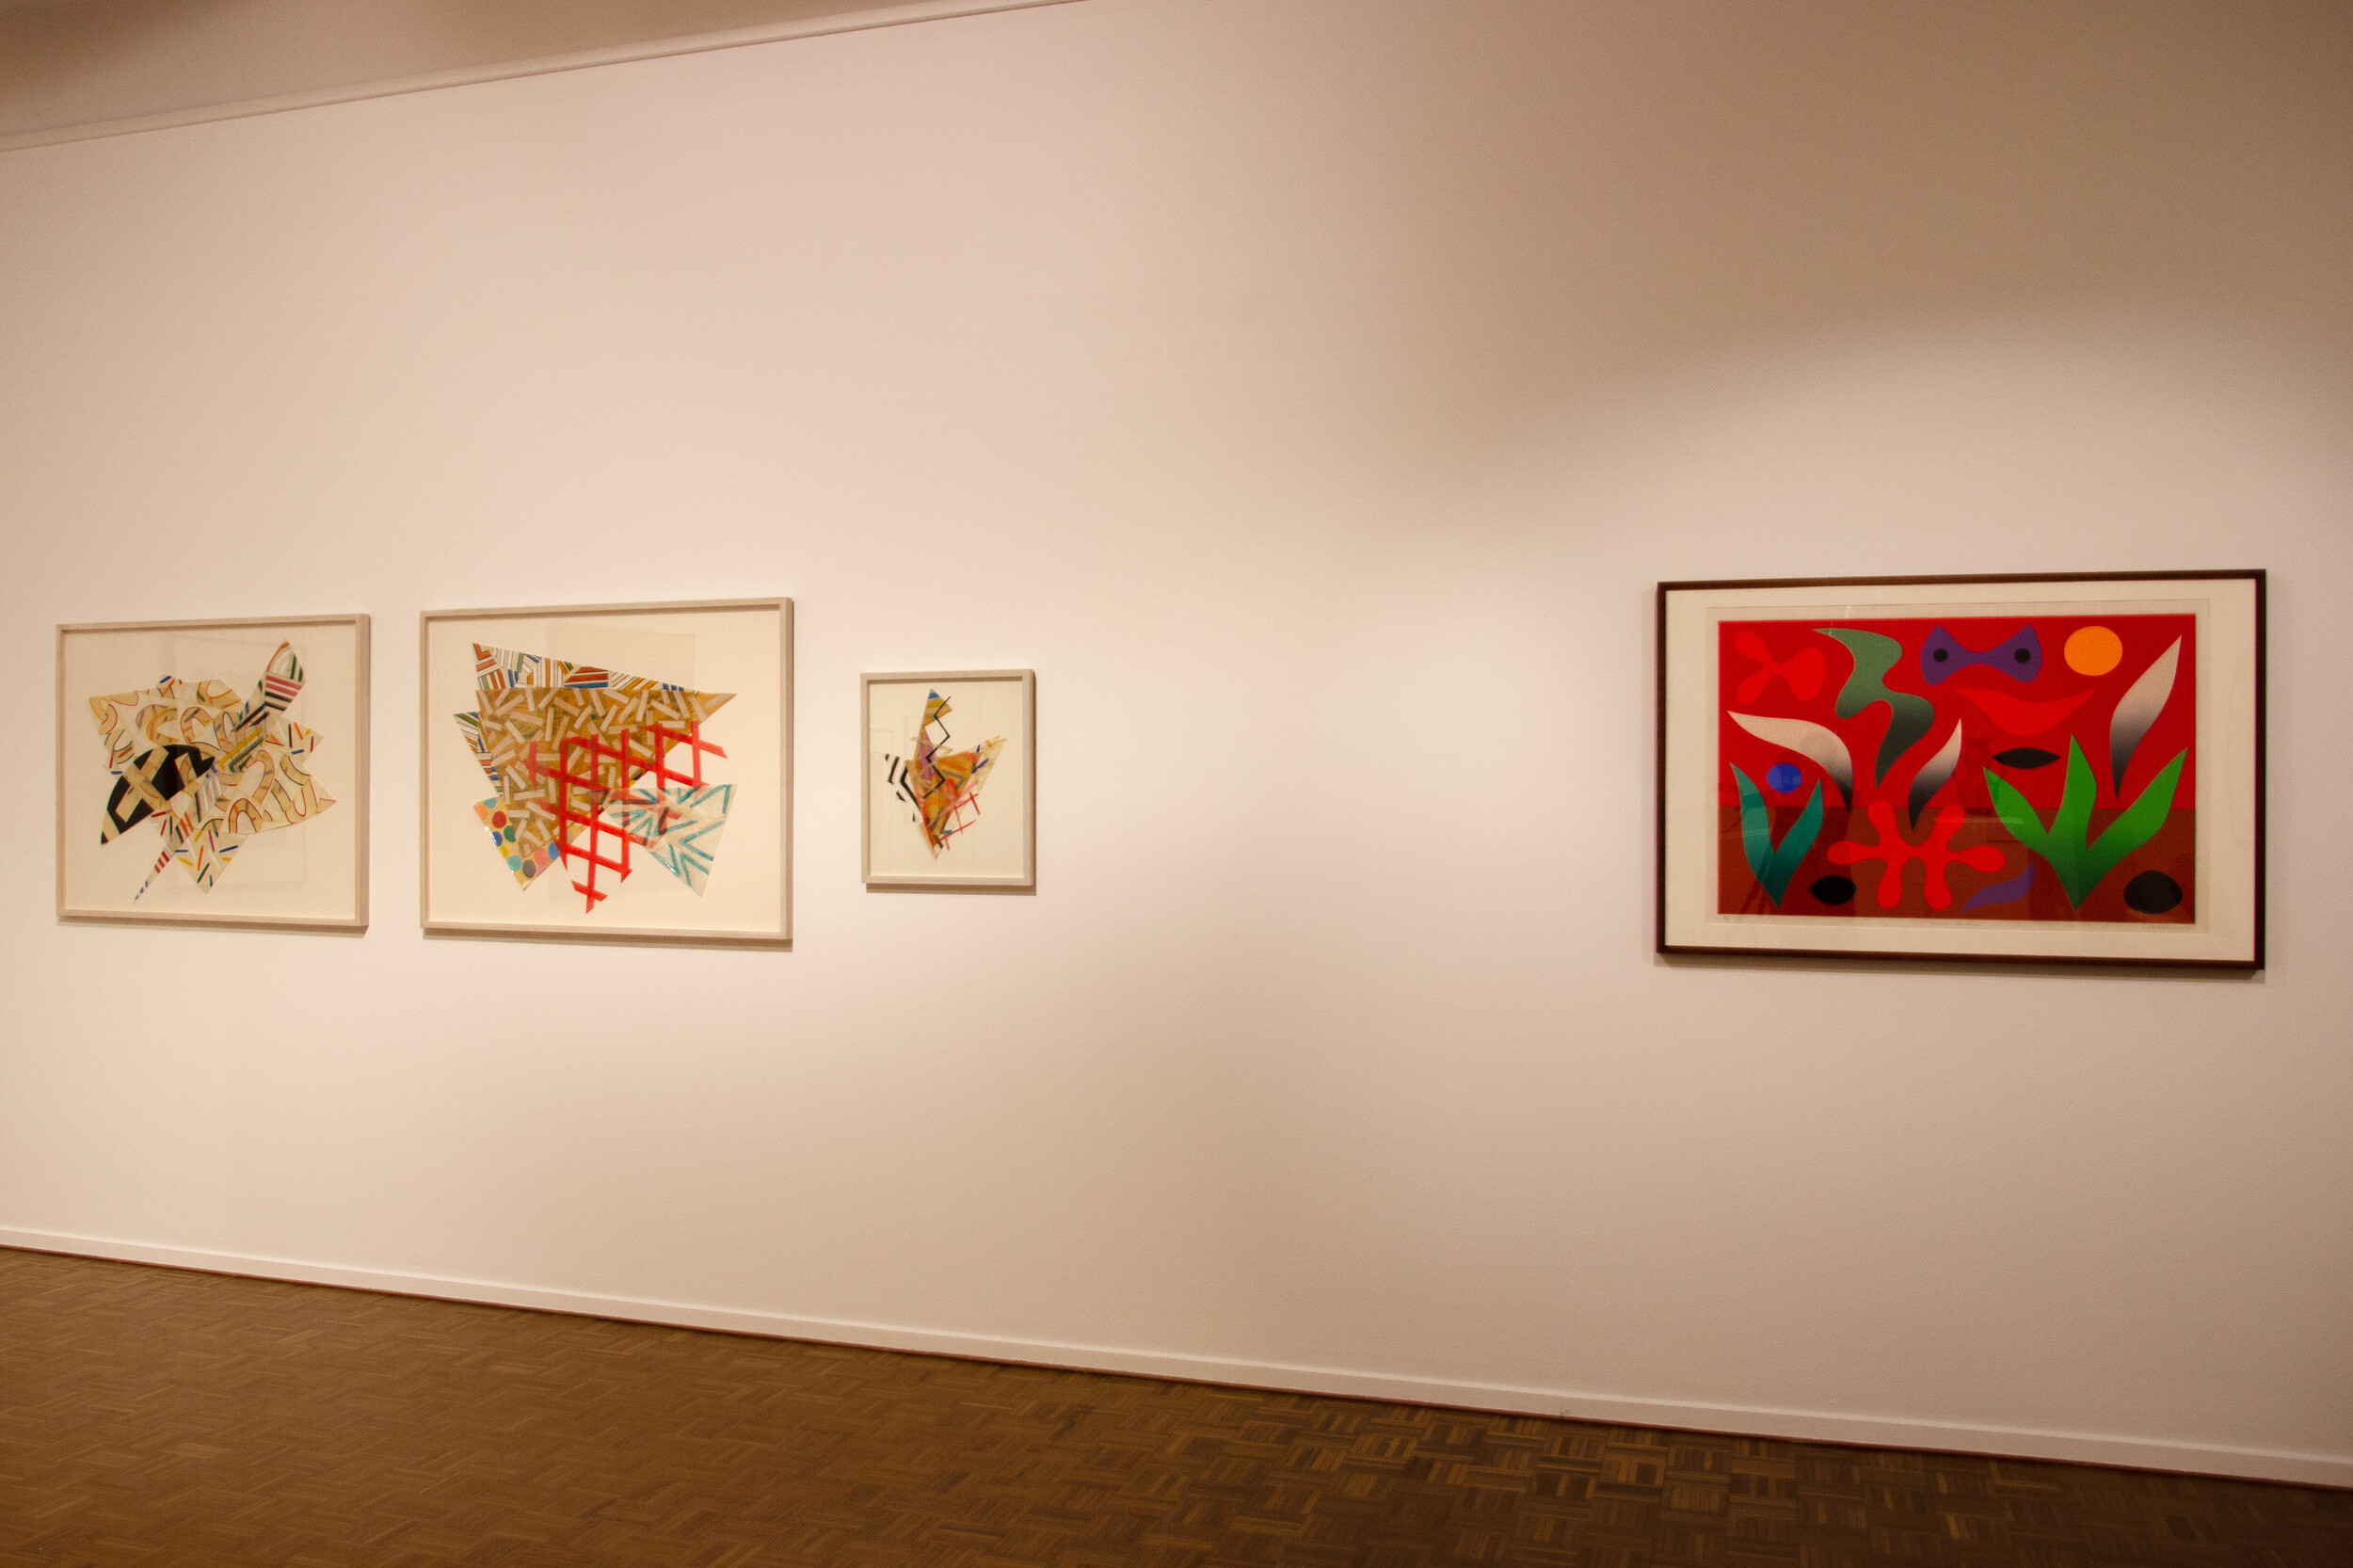 Installation view of <em>Radical: Australian Abstract Art of the 70s and 80s</em>,<br />
featuring Summer Garden by John Coburn and Shaped series #1, Shaped series #2 and Untitled (Shaped 2) by Elizabeth Gower, Warrnambool Art Gallery.